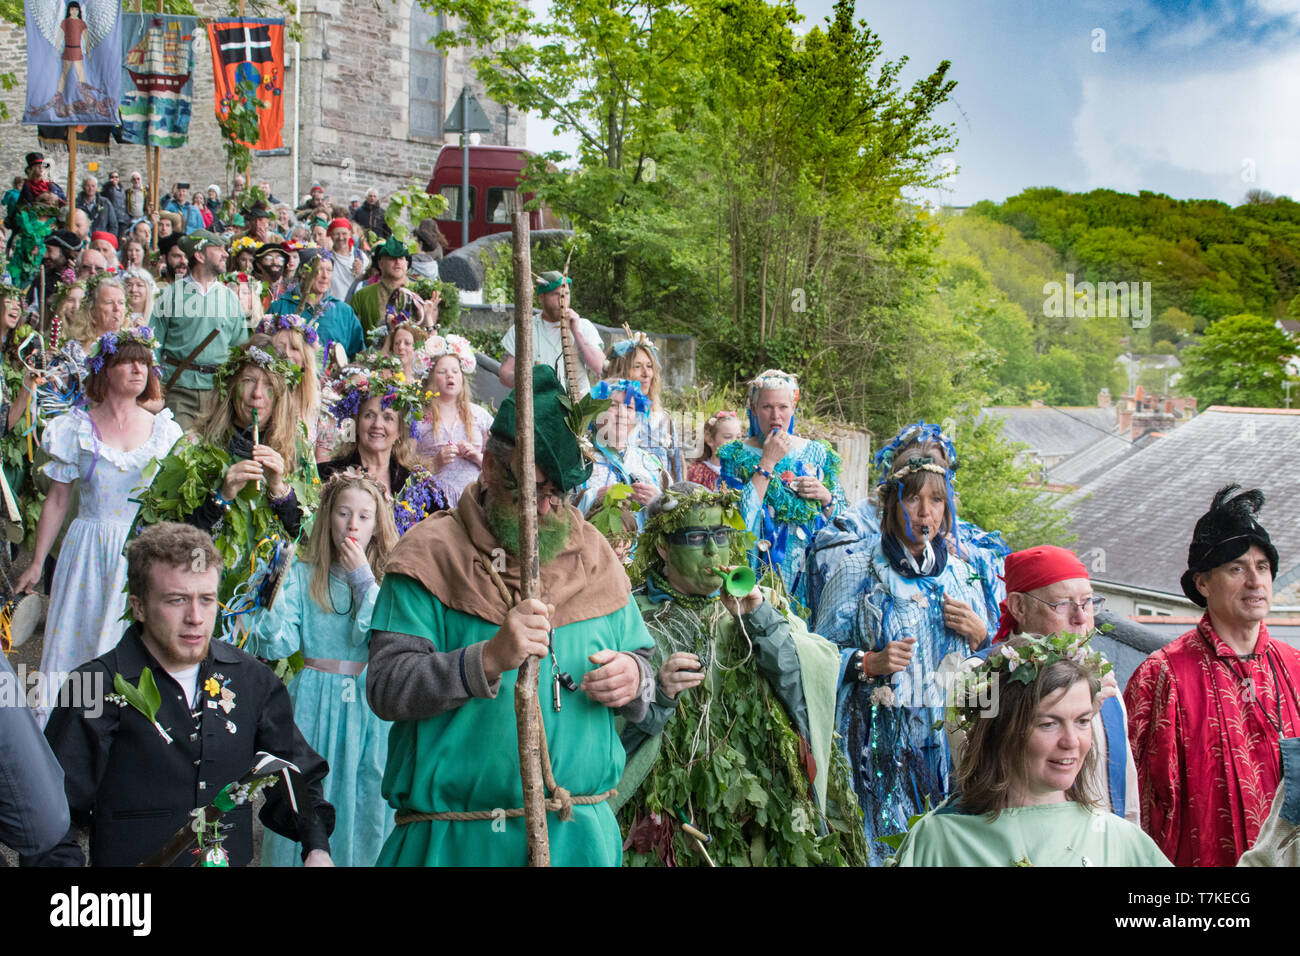 Helston, Cornwall, UK. 8th May 2019. Helston Flora day annual spring festival. Seen here the participants of the 'Hal-An-Tow'. From Robin Hood and Little John, St George & the Dragon, St Michael & the Devil to the Spaniards of Mousehole, all reinact the battles of `good defeating evil`to `drive out the old and welcome in the new`. Credit Simon Maycock / Alamy Live News. Stock Photo